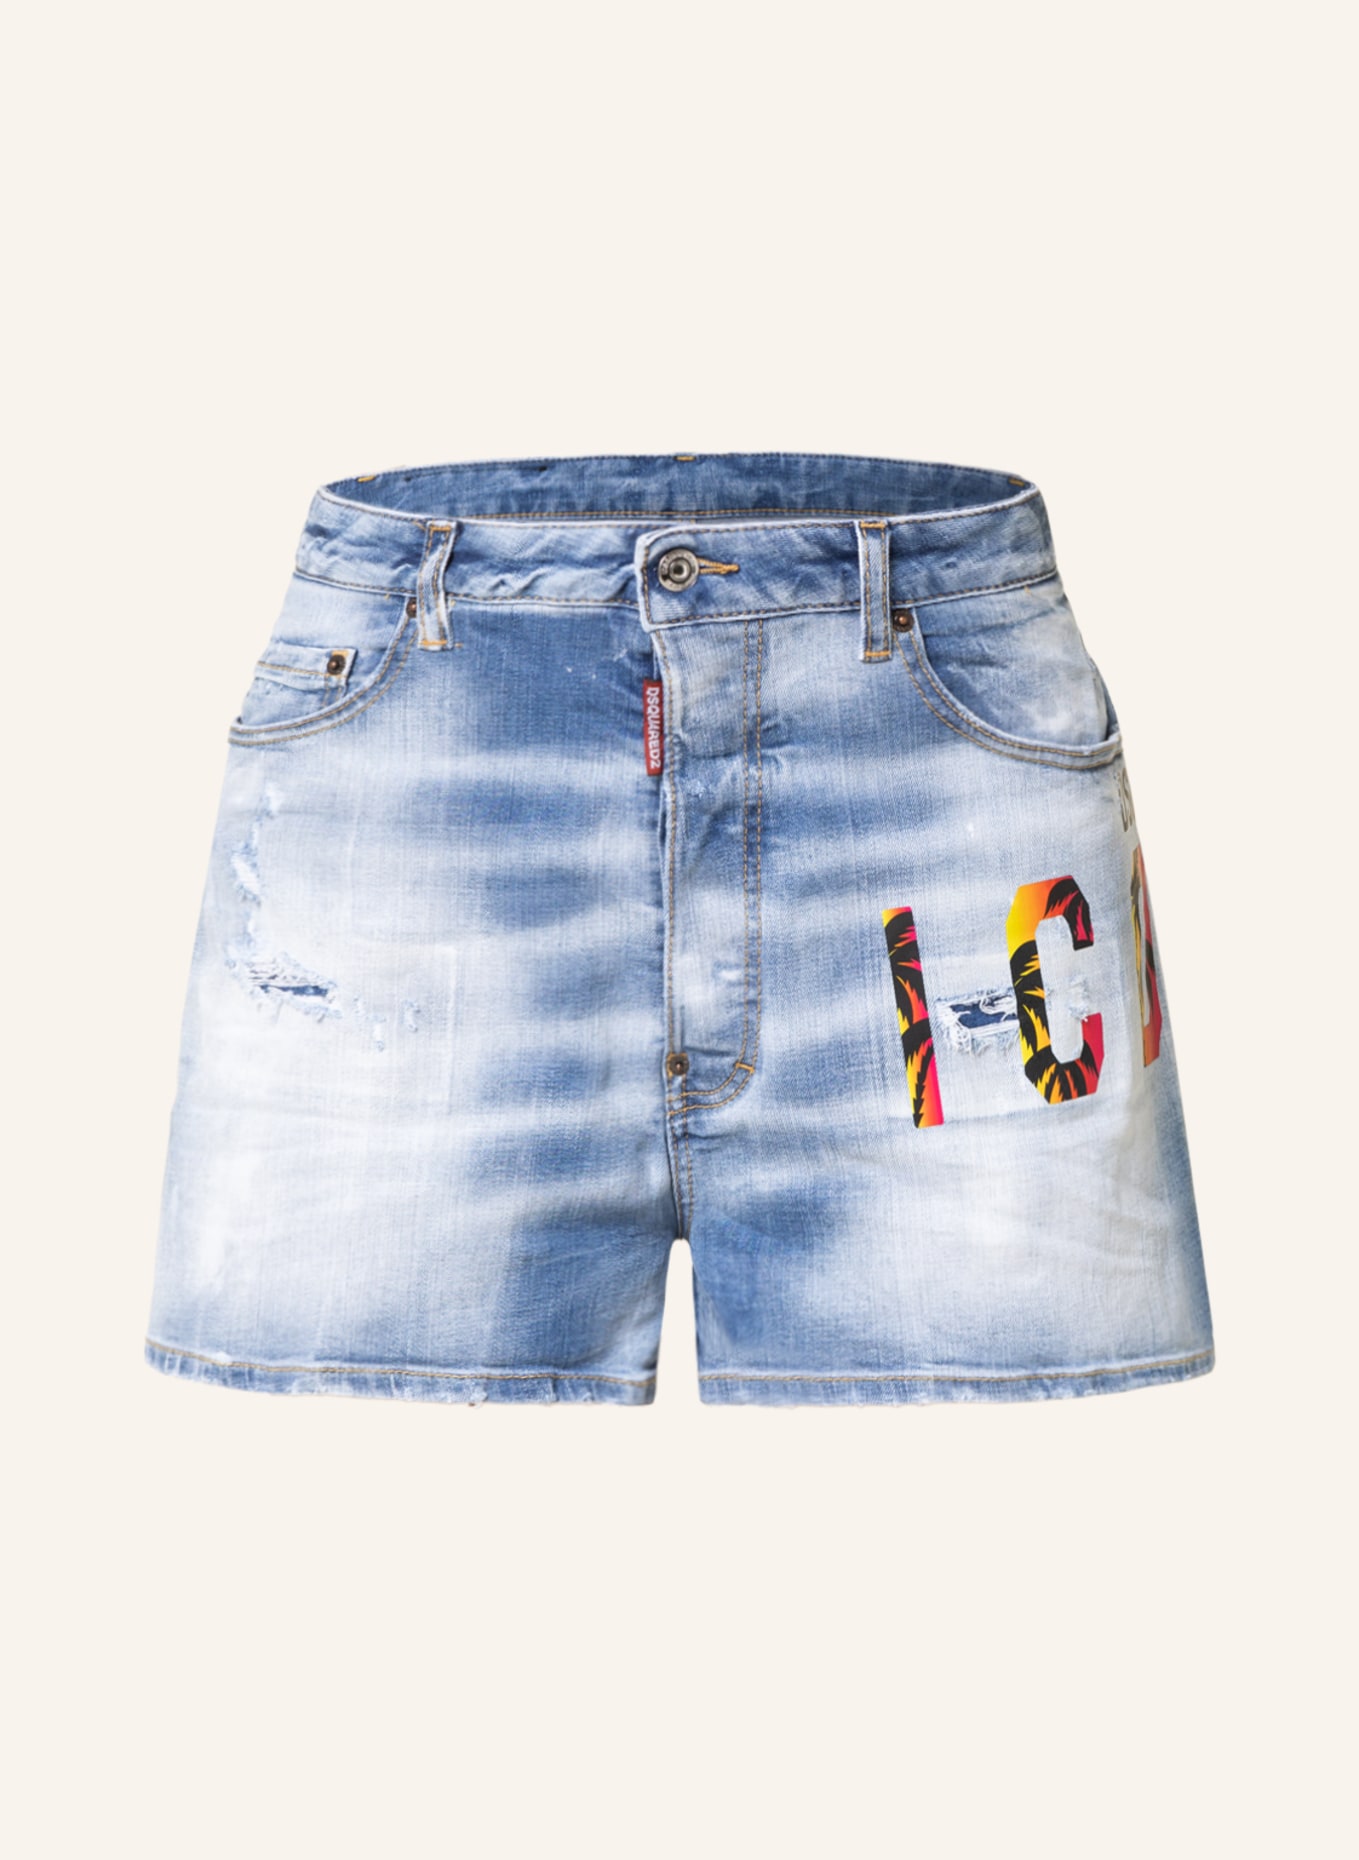 DSQUARED2 Jeansshorts SUNSET BAGGY, Farbe: 470 BLUE NAVY (Bild 1)